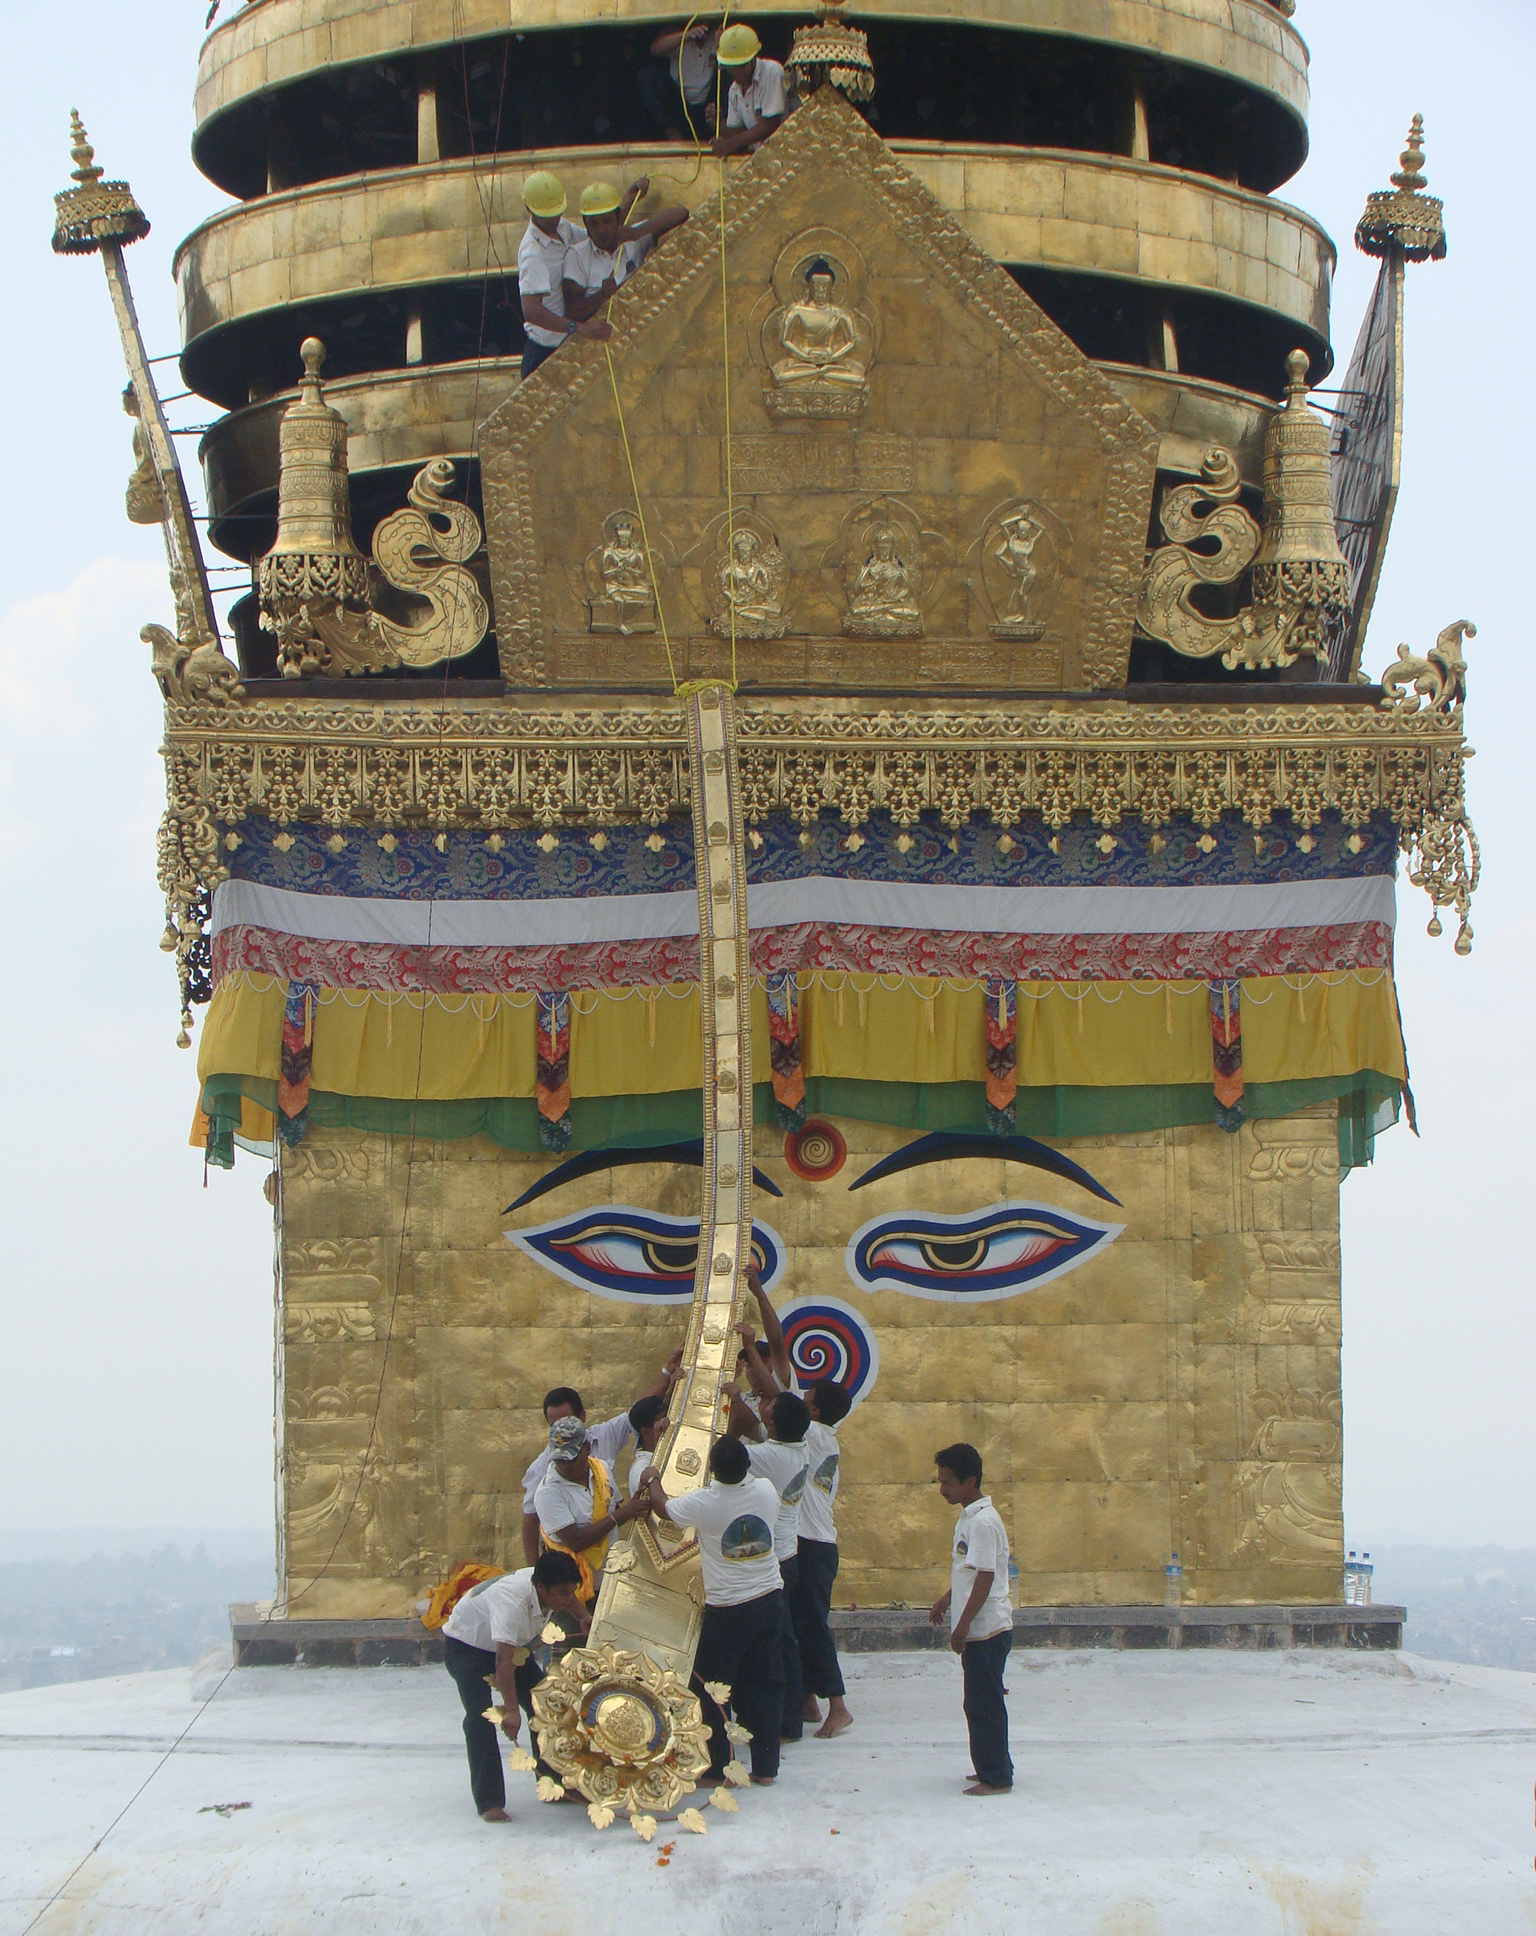 Golden stupa tower decorated with banners, filigree, and painted set of eyes with group of people at its base